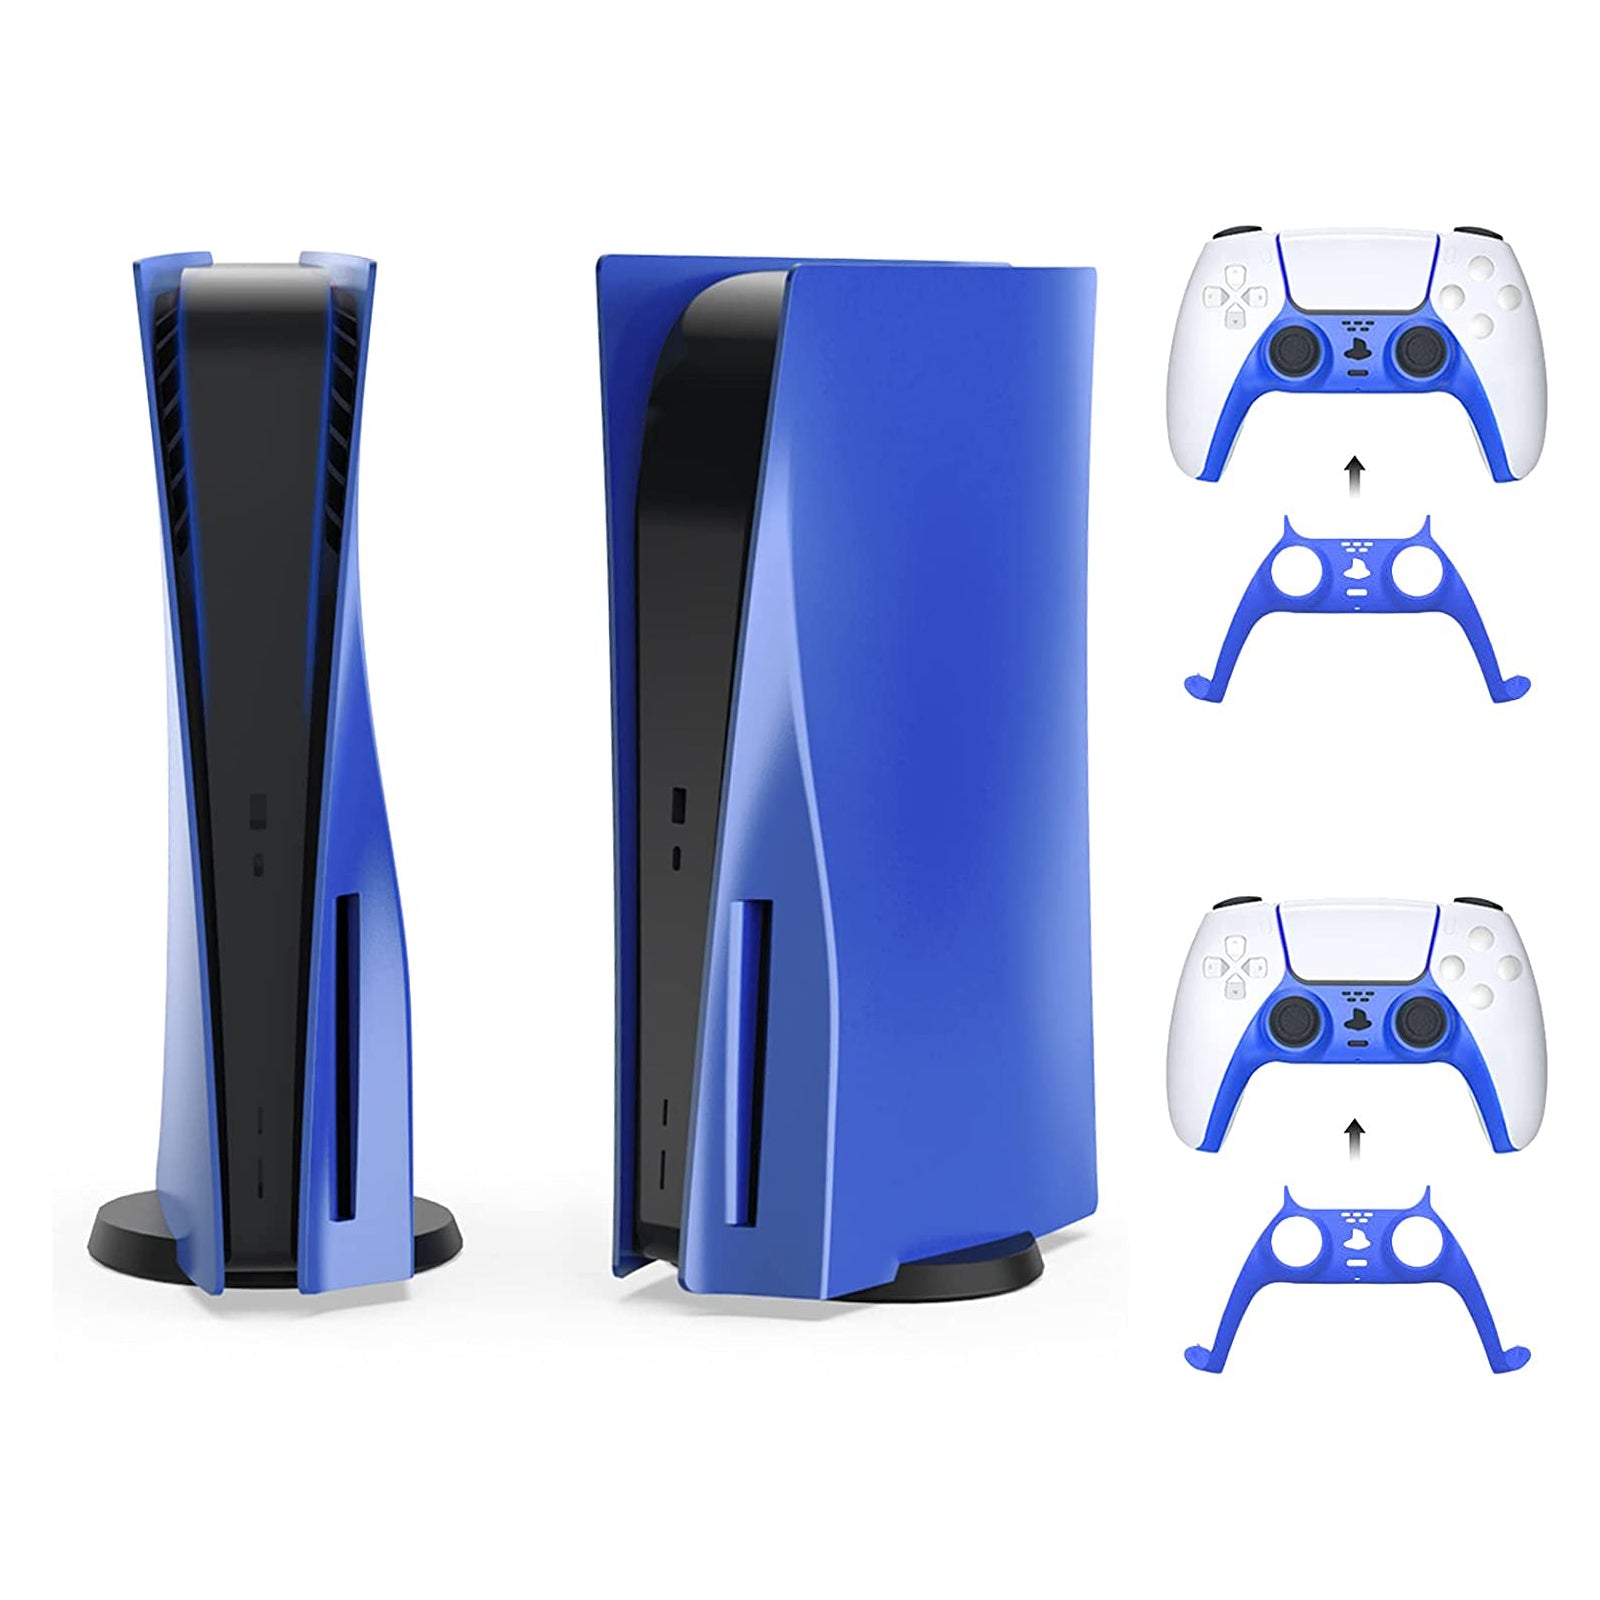 NexiGo PS5 Console and Controller Stylish Cover Kit (Blue)